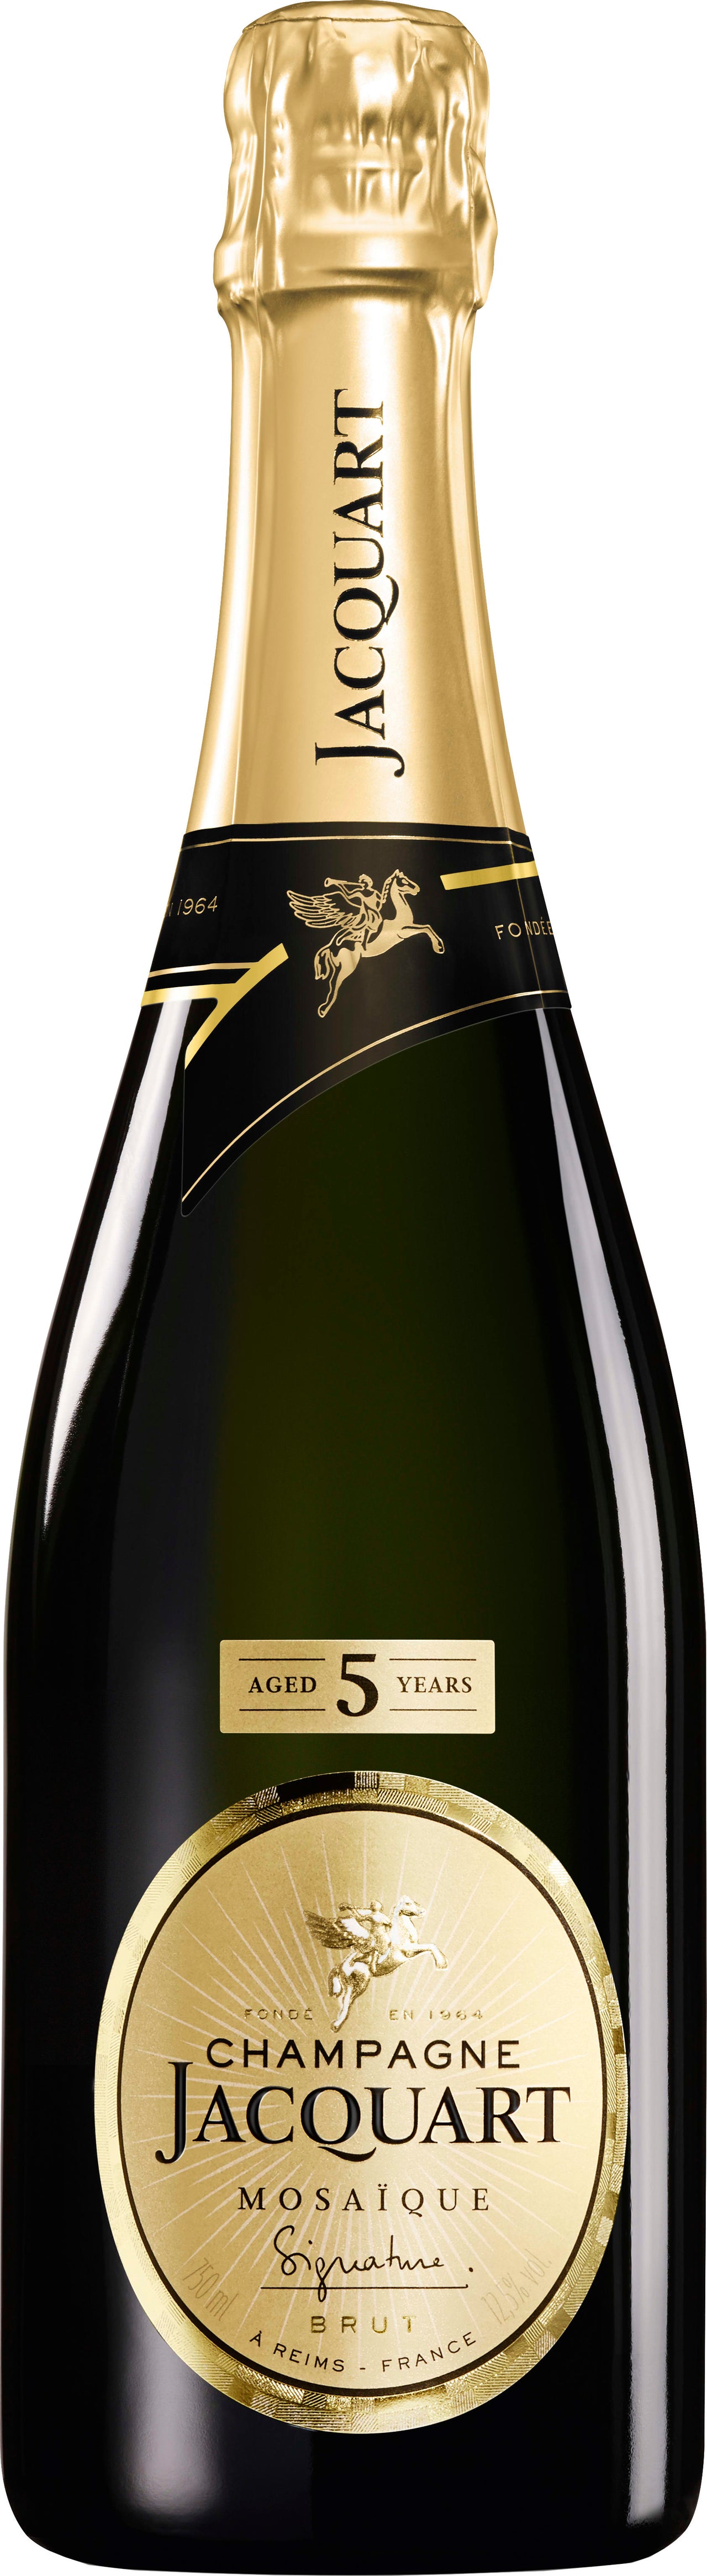 Champagne Jacquart Champagne Mosaique Signature 75cl NV - Buy Champagne Jacquart Wines from GREAT WINES DIRECT wine shop